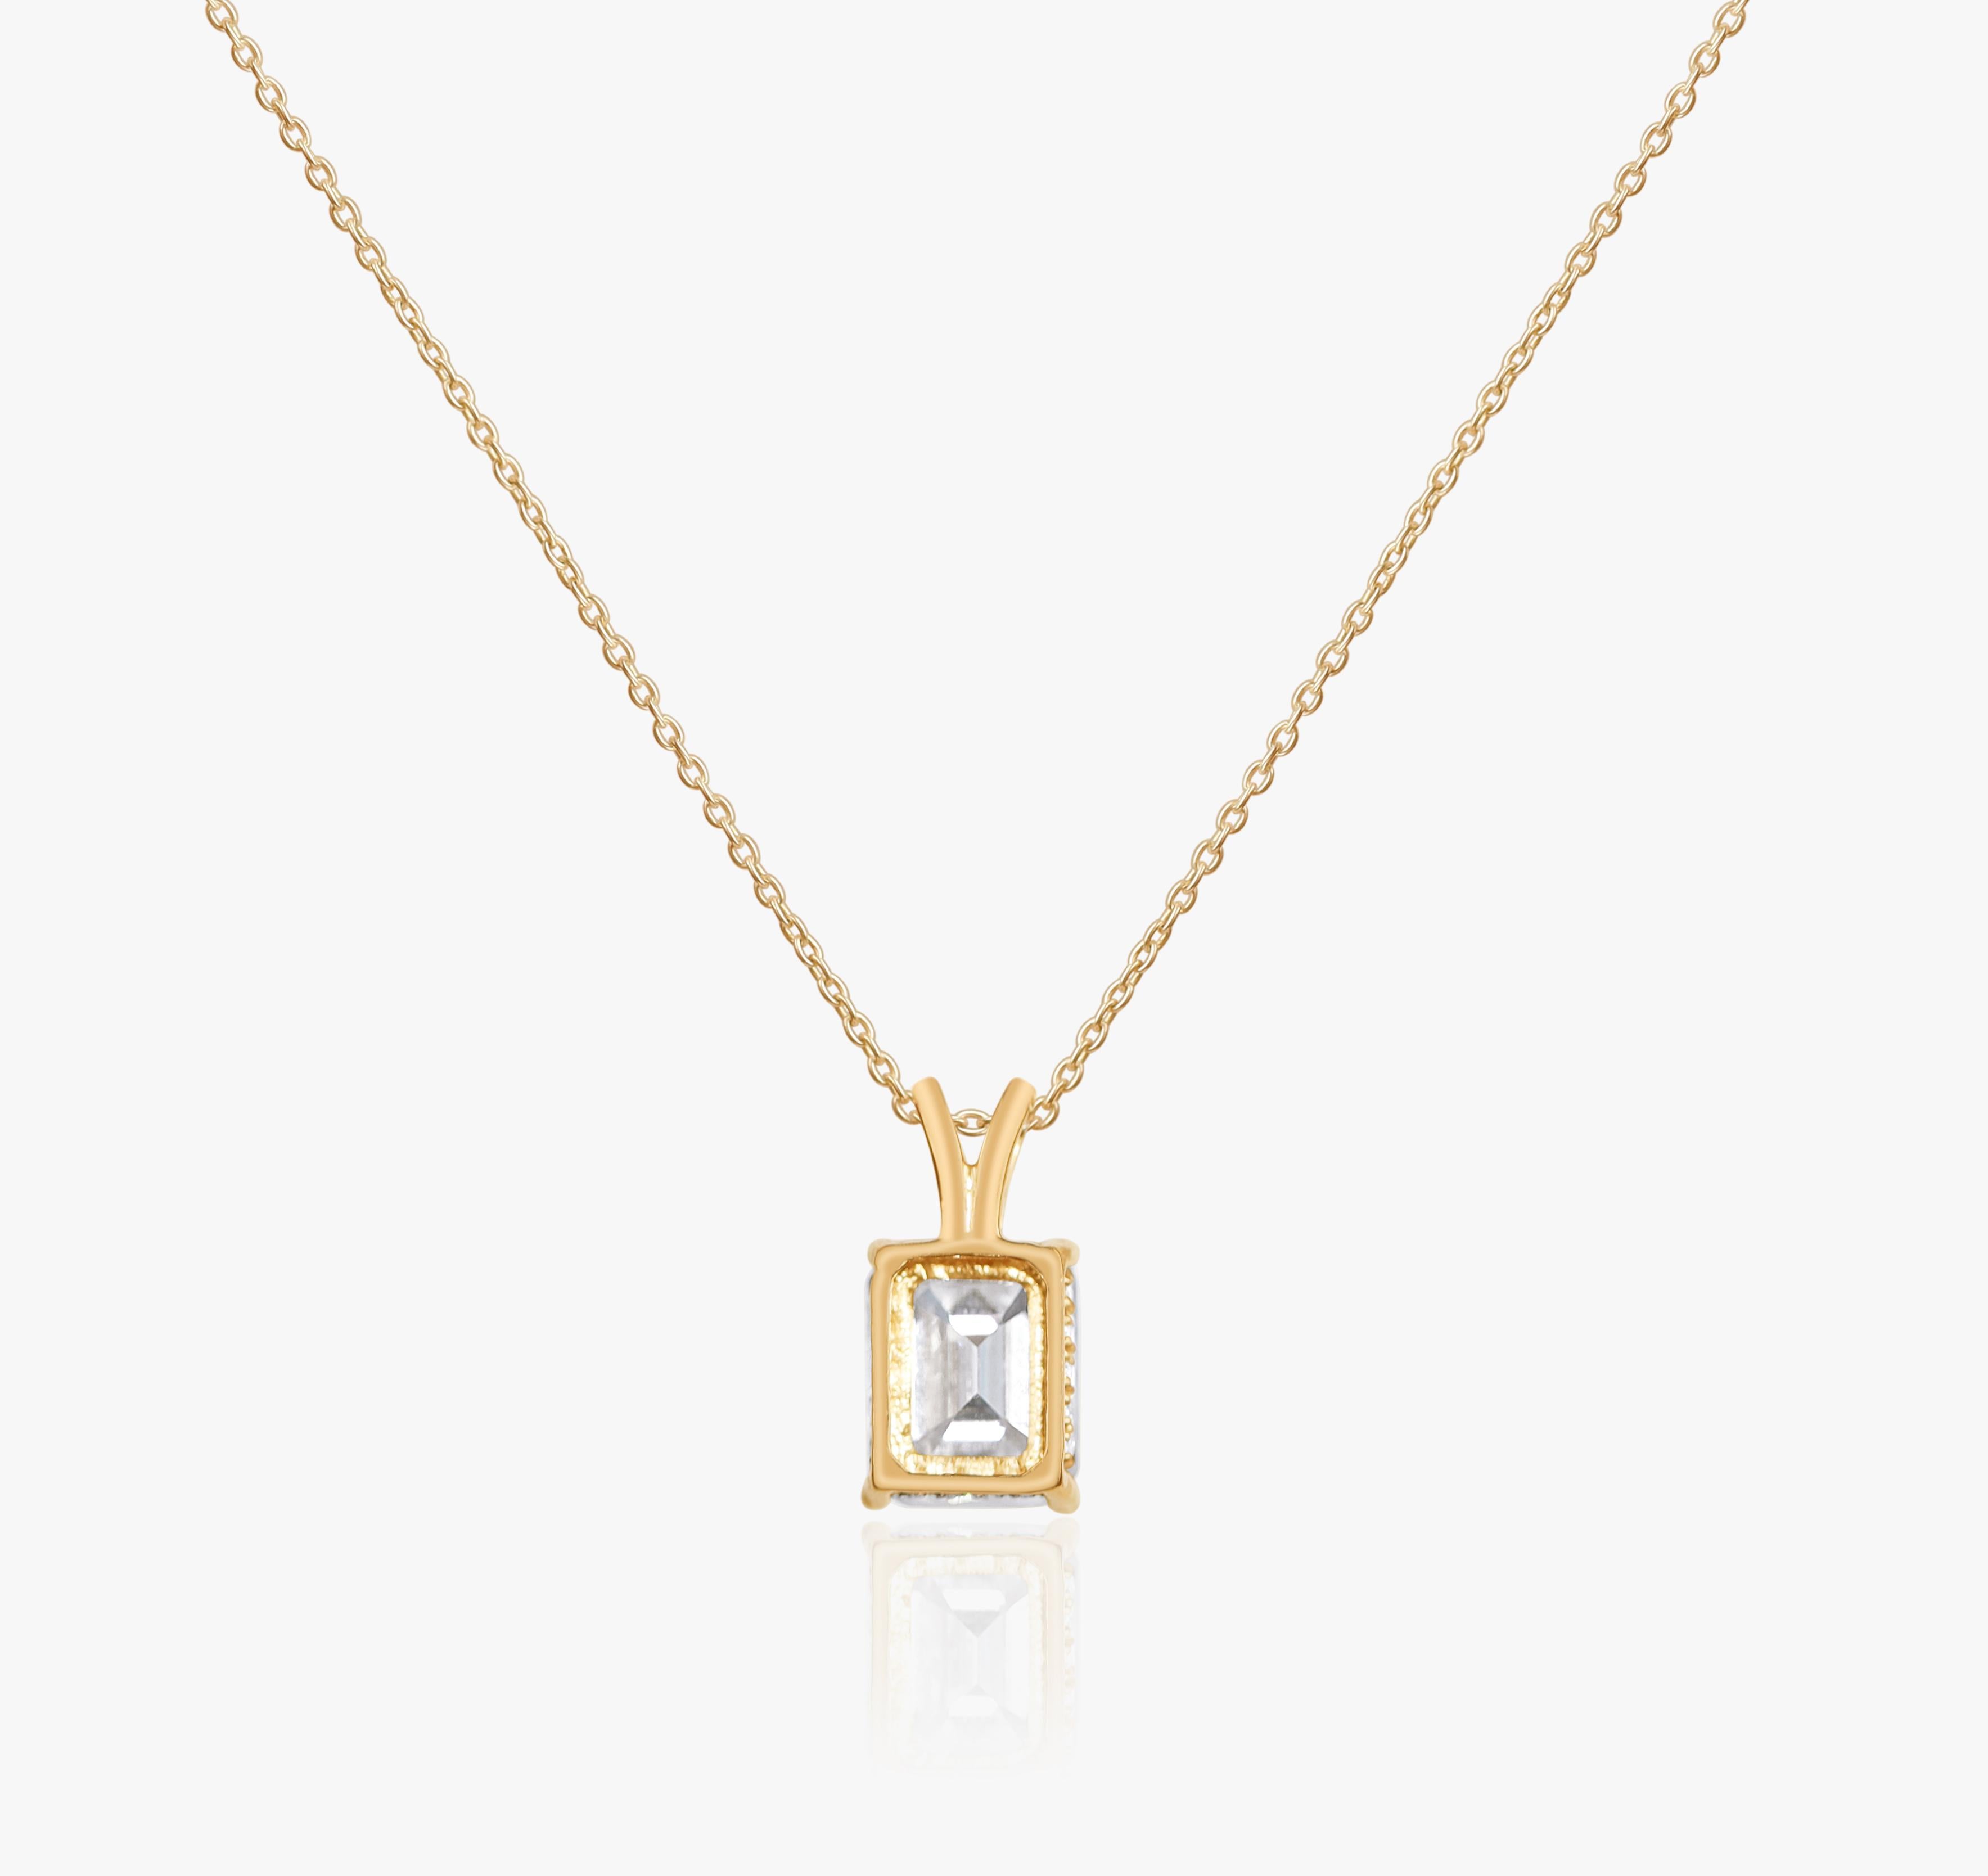 GIA Report Certified 3.5 Carat Emerald Cut Diamond 18k Yellow Gold Pendant for her

Available in 18k Yellow gold.

Same design can be made also with other custom gemstones per request.

Product details:

- Solid gold

- Main stone - approx. 3.5